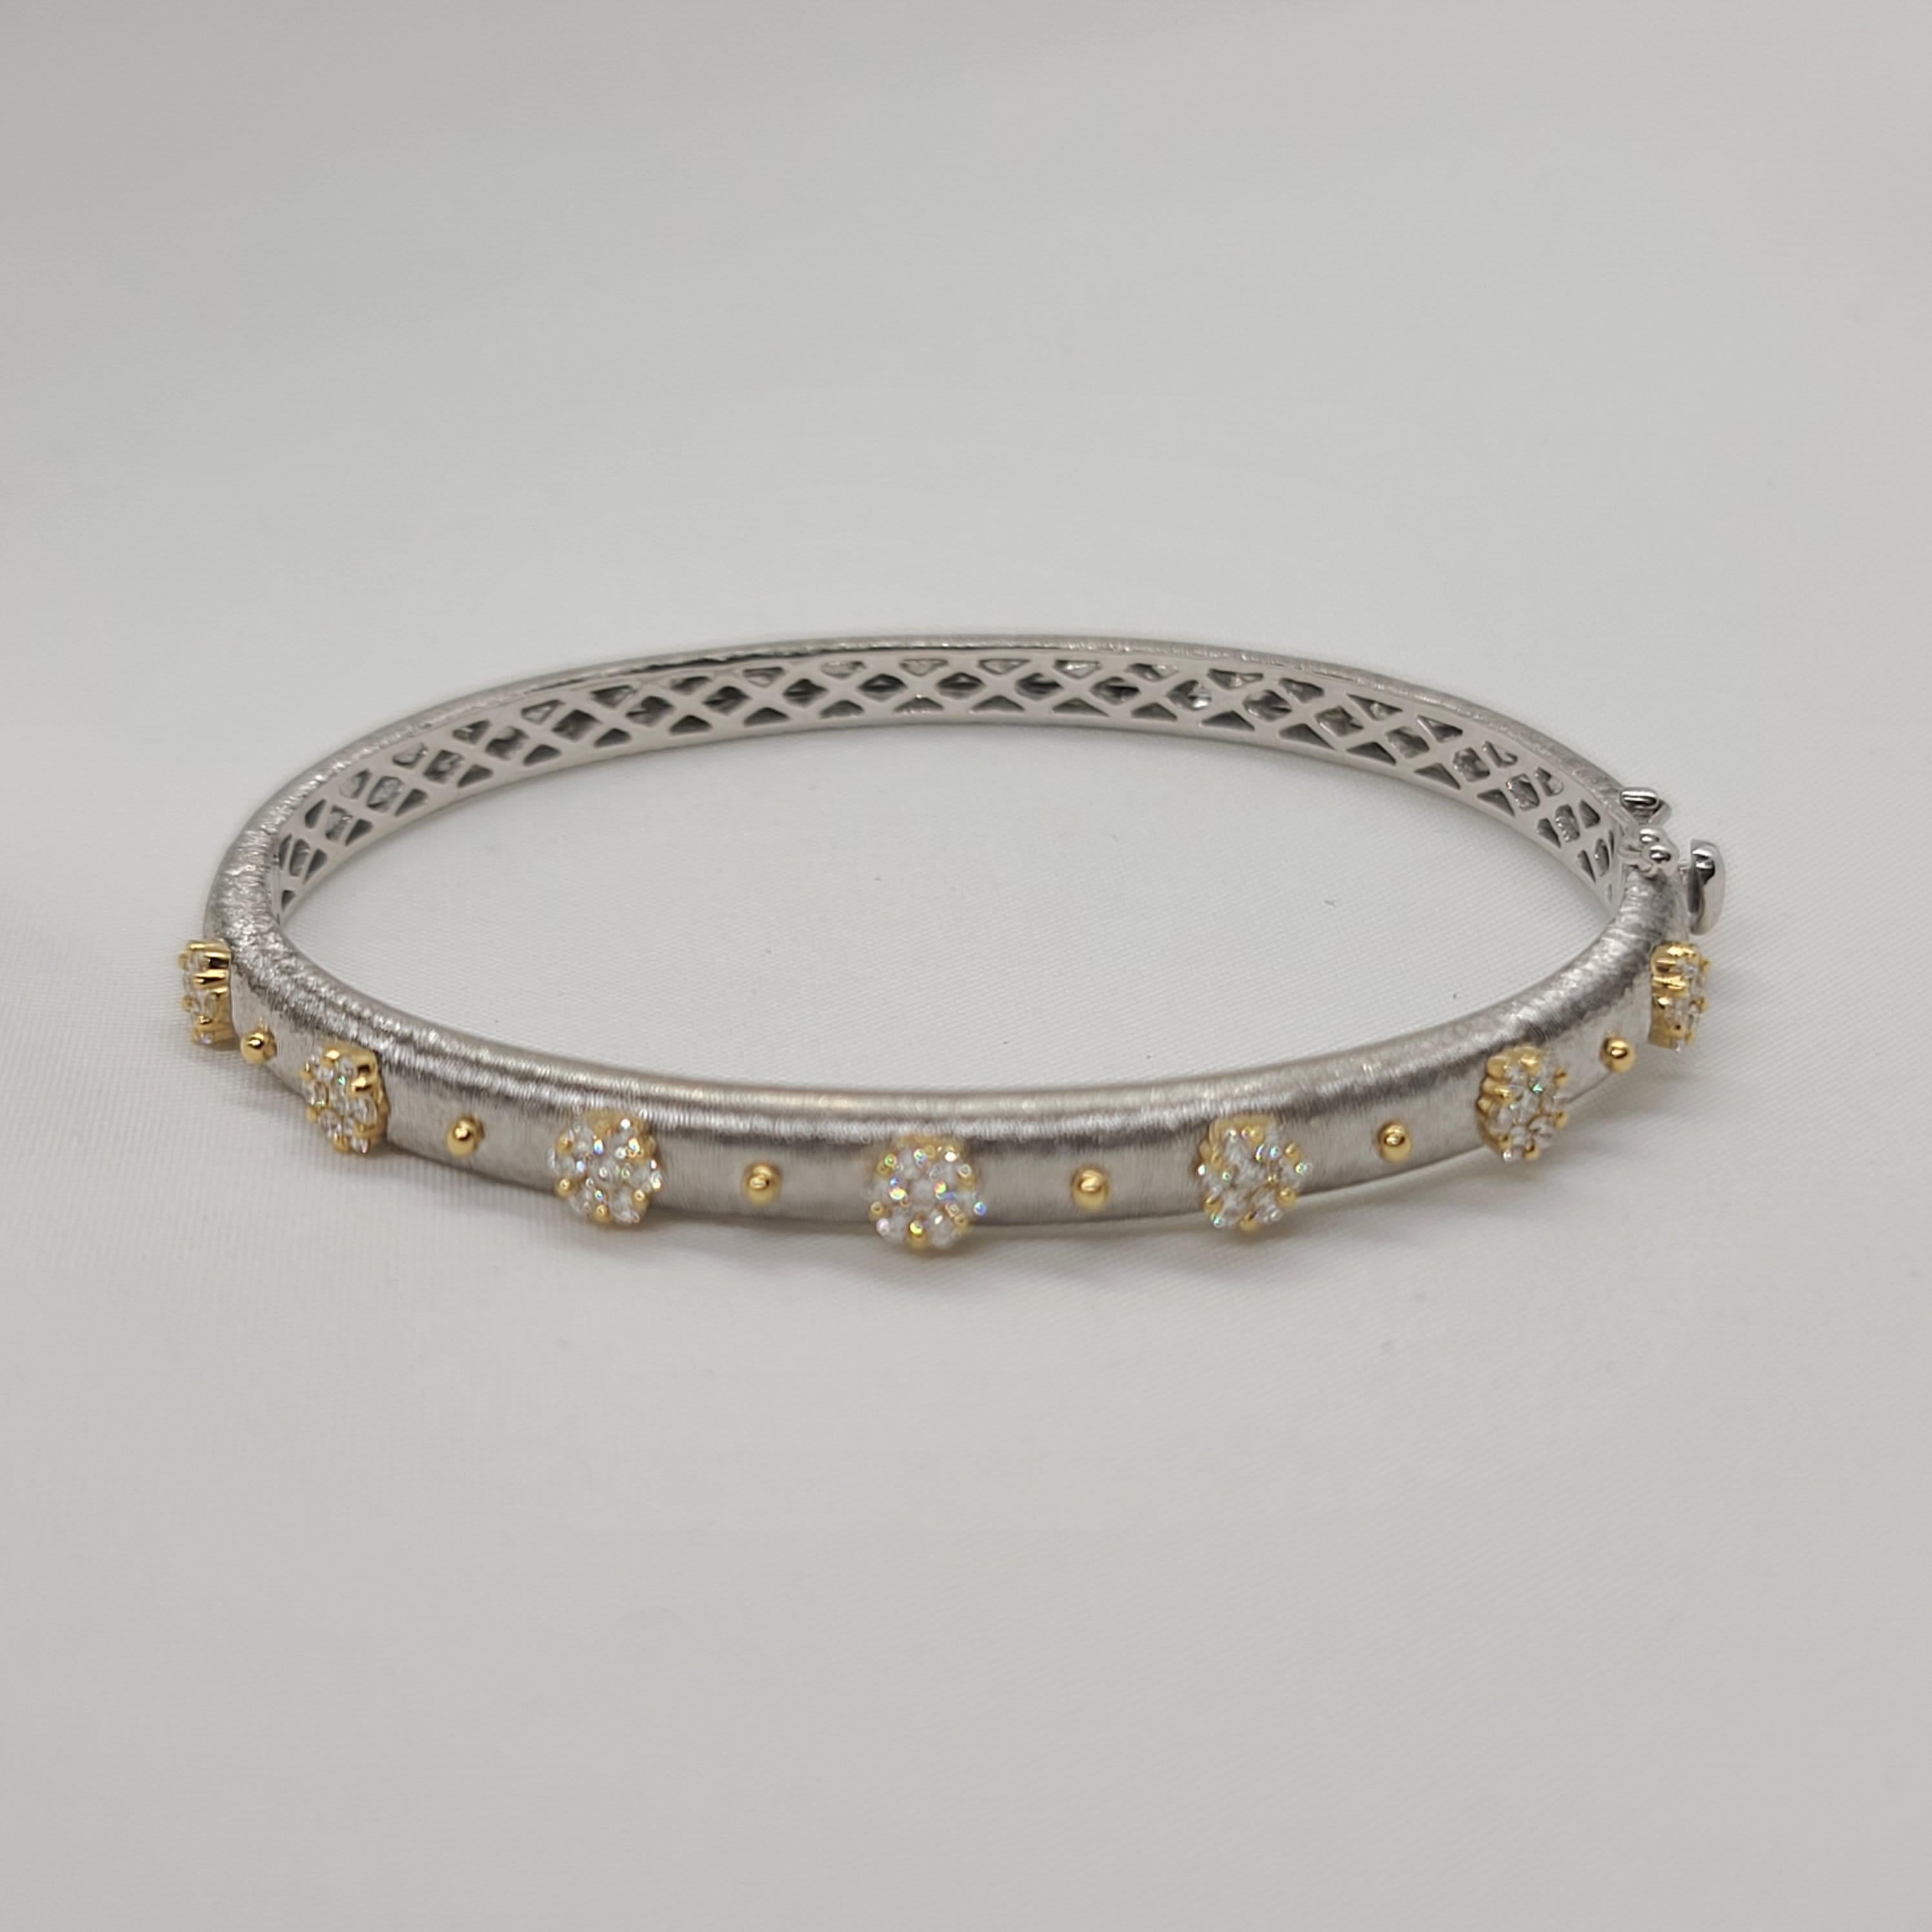 18K WHITE AND YELLOW GOLD Diamonds Bangle Link Bracelet in Florentine Finish
49 Round Diamonds - 0.69 cts
18KWY - 16.84 gm
size - 48 x 58 cm / 2.28 x 1.89 inches

This unique piece is made using the Florentine exquisite technique of feather thin